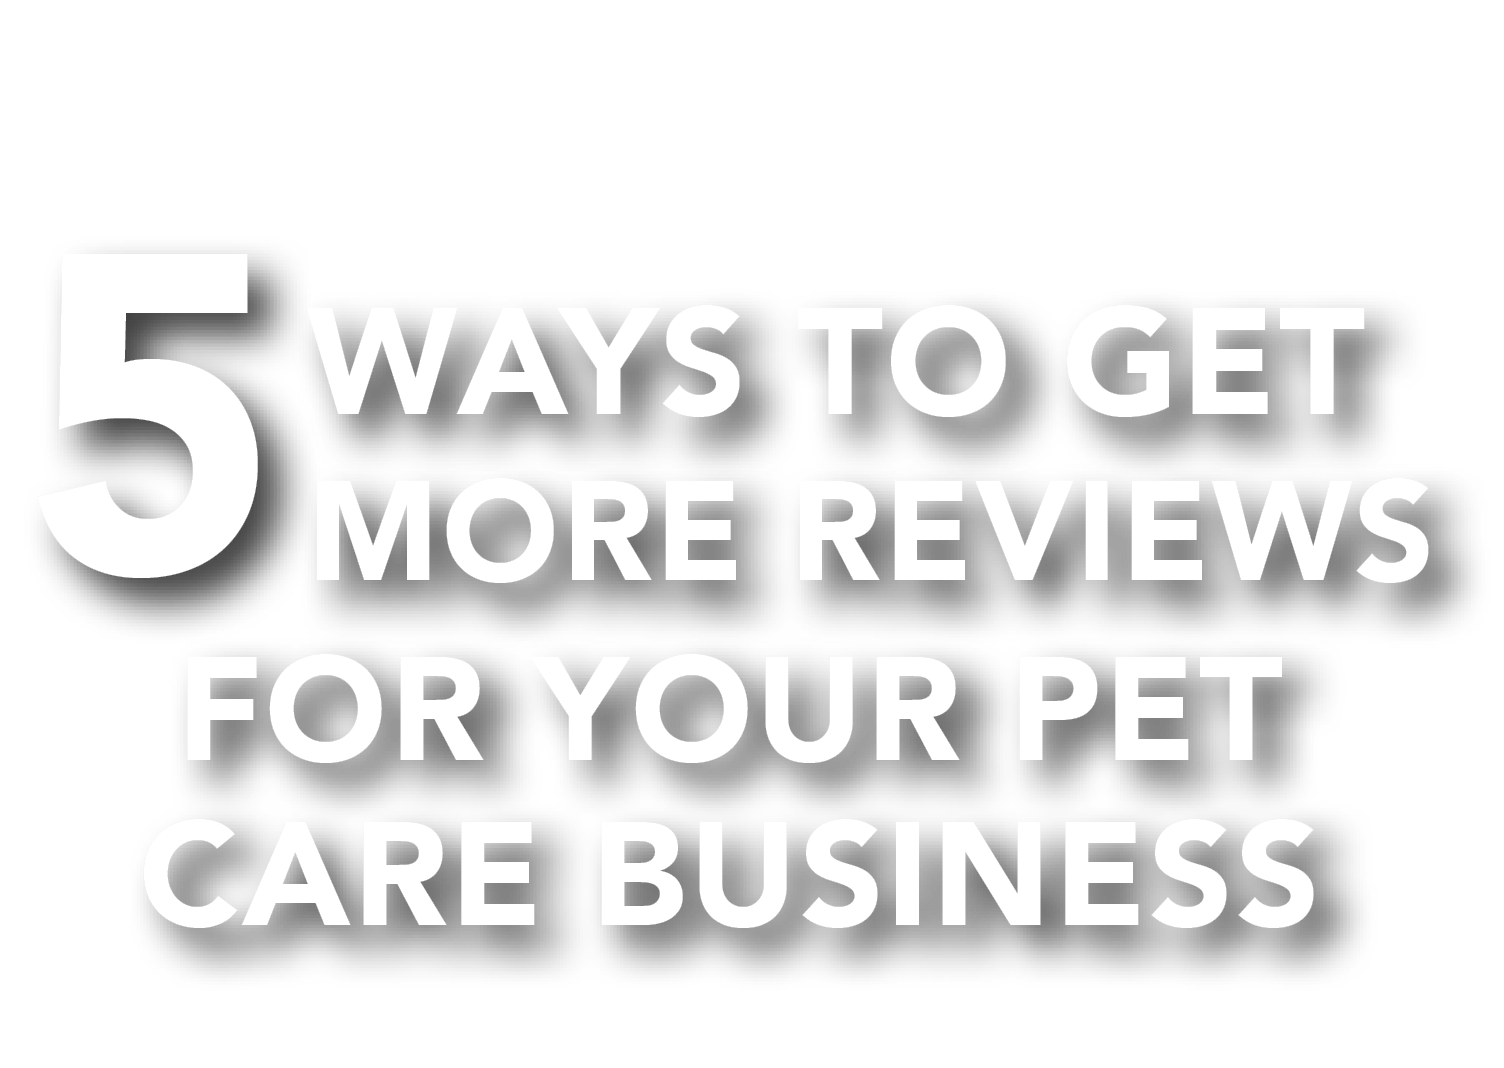 5 Ways to Get More Reviews For Your Pet Care Business